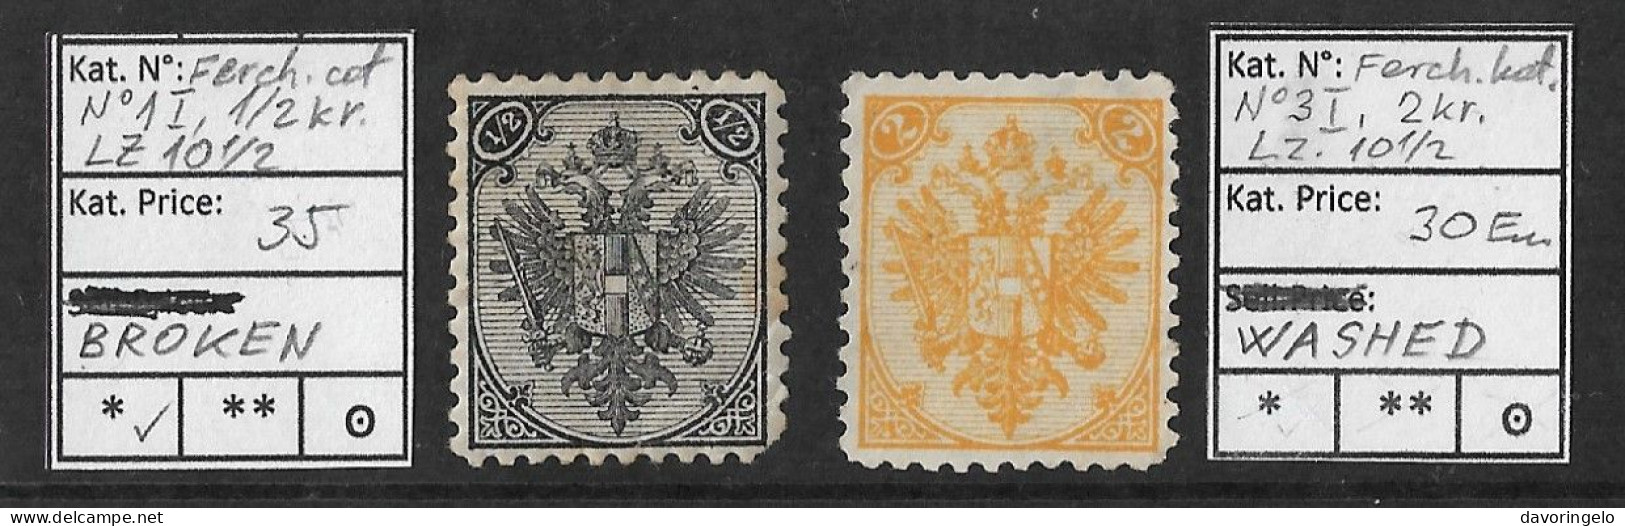 Bosnia-Herzegovina/Austria-Hungary, Coat Of Arms (2 STAMPS), Both I Plate, Both Perf. 10 1/2, Both In Bad Conditions - Bosnia Herzegovina